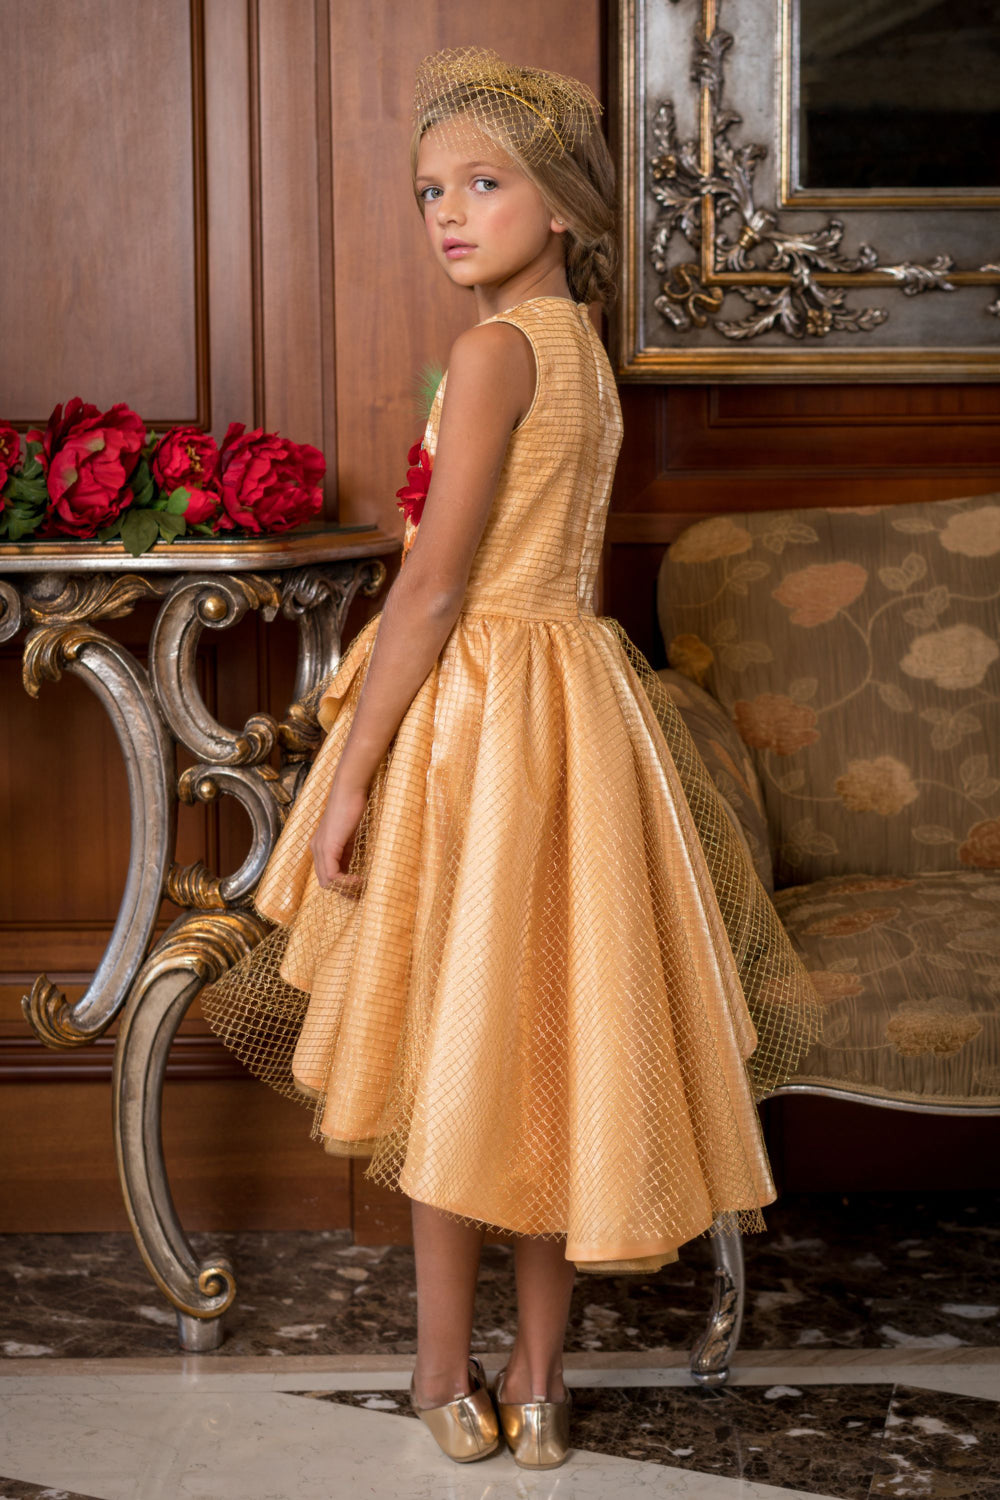 Gold organza tulle dress with hand-made red flowers